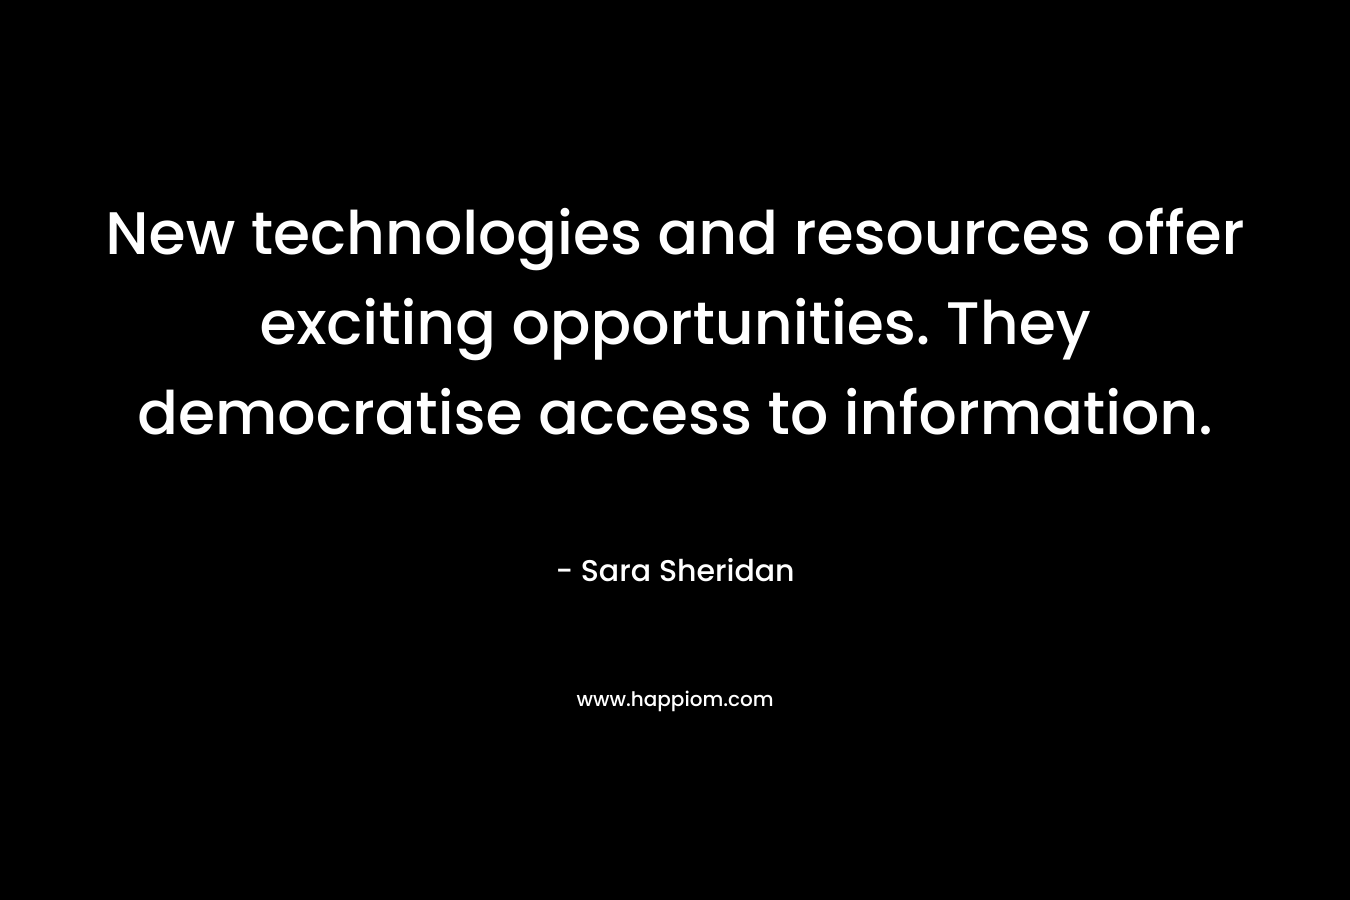 New technologies and resources offer exciting opportunities. They democratise access to information. – Sara Sheridan